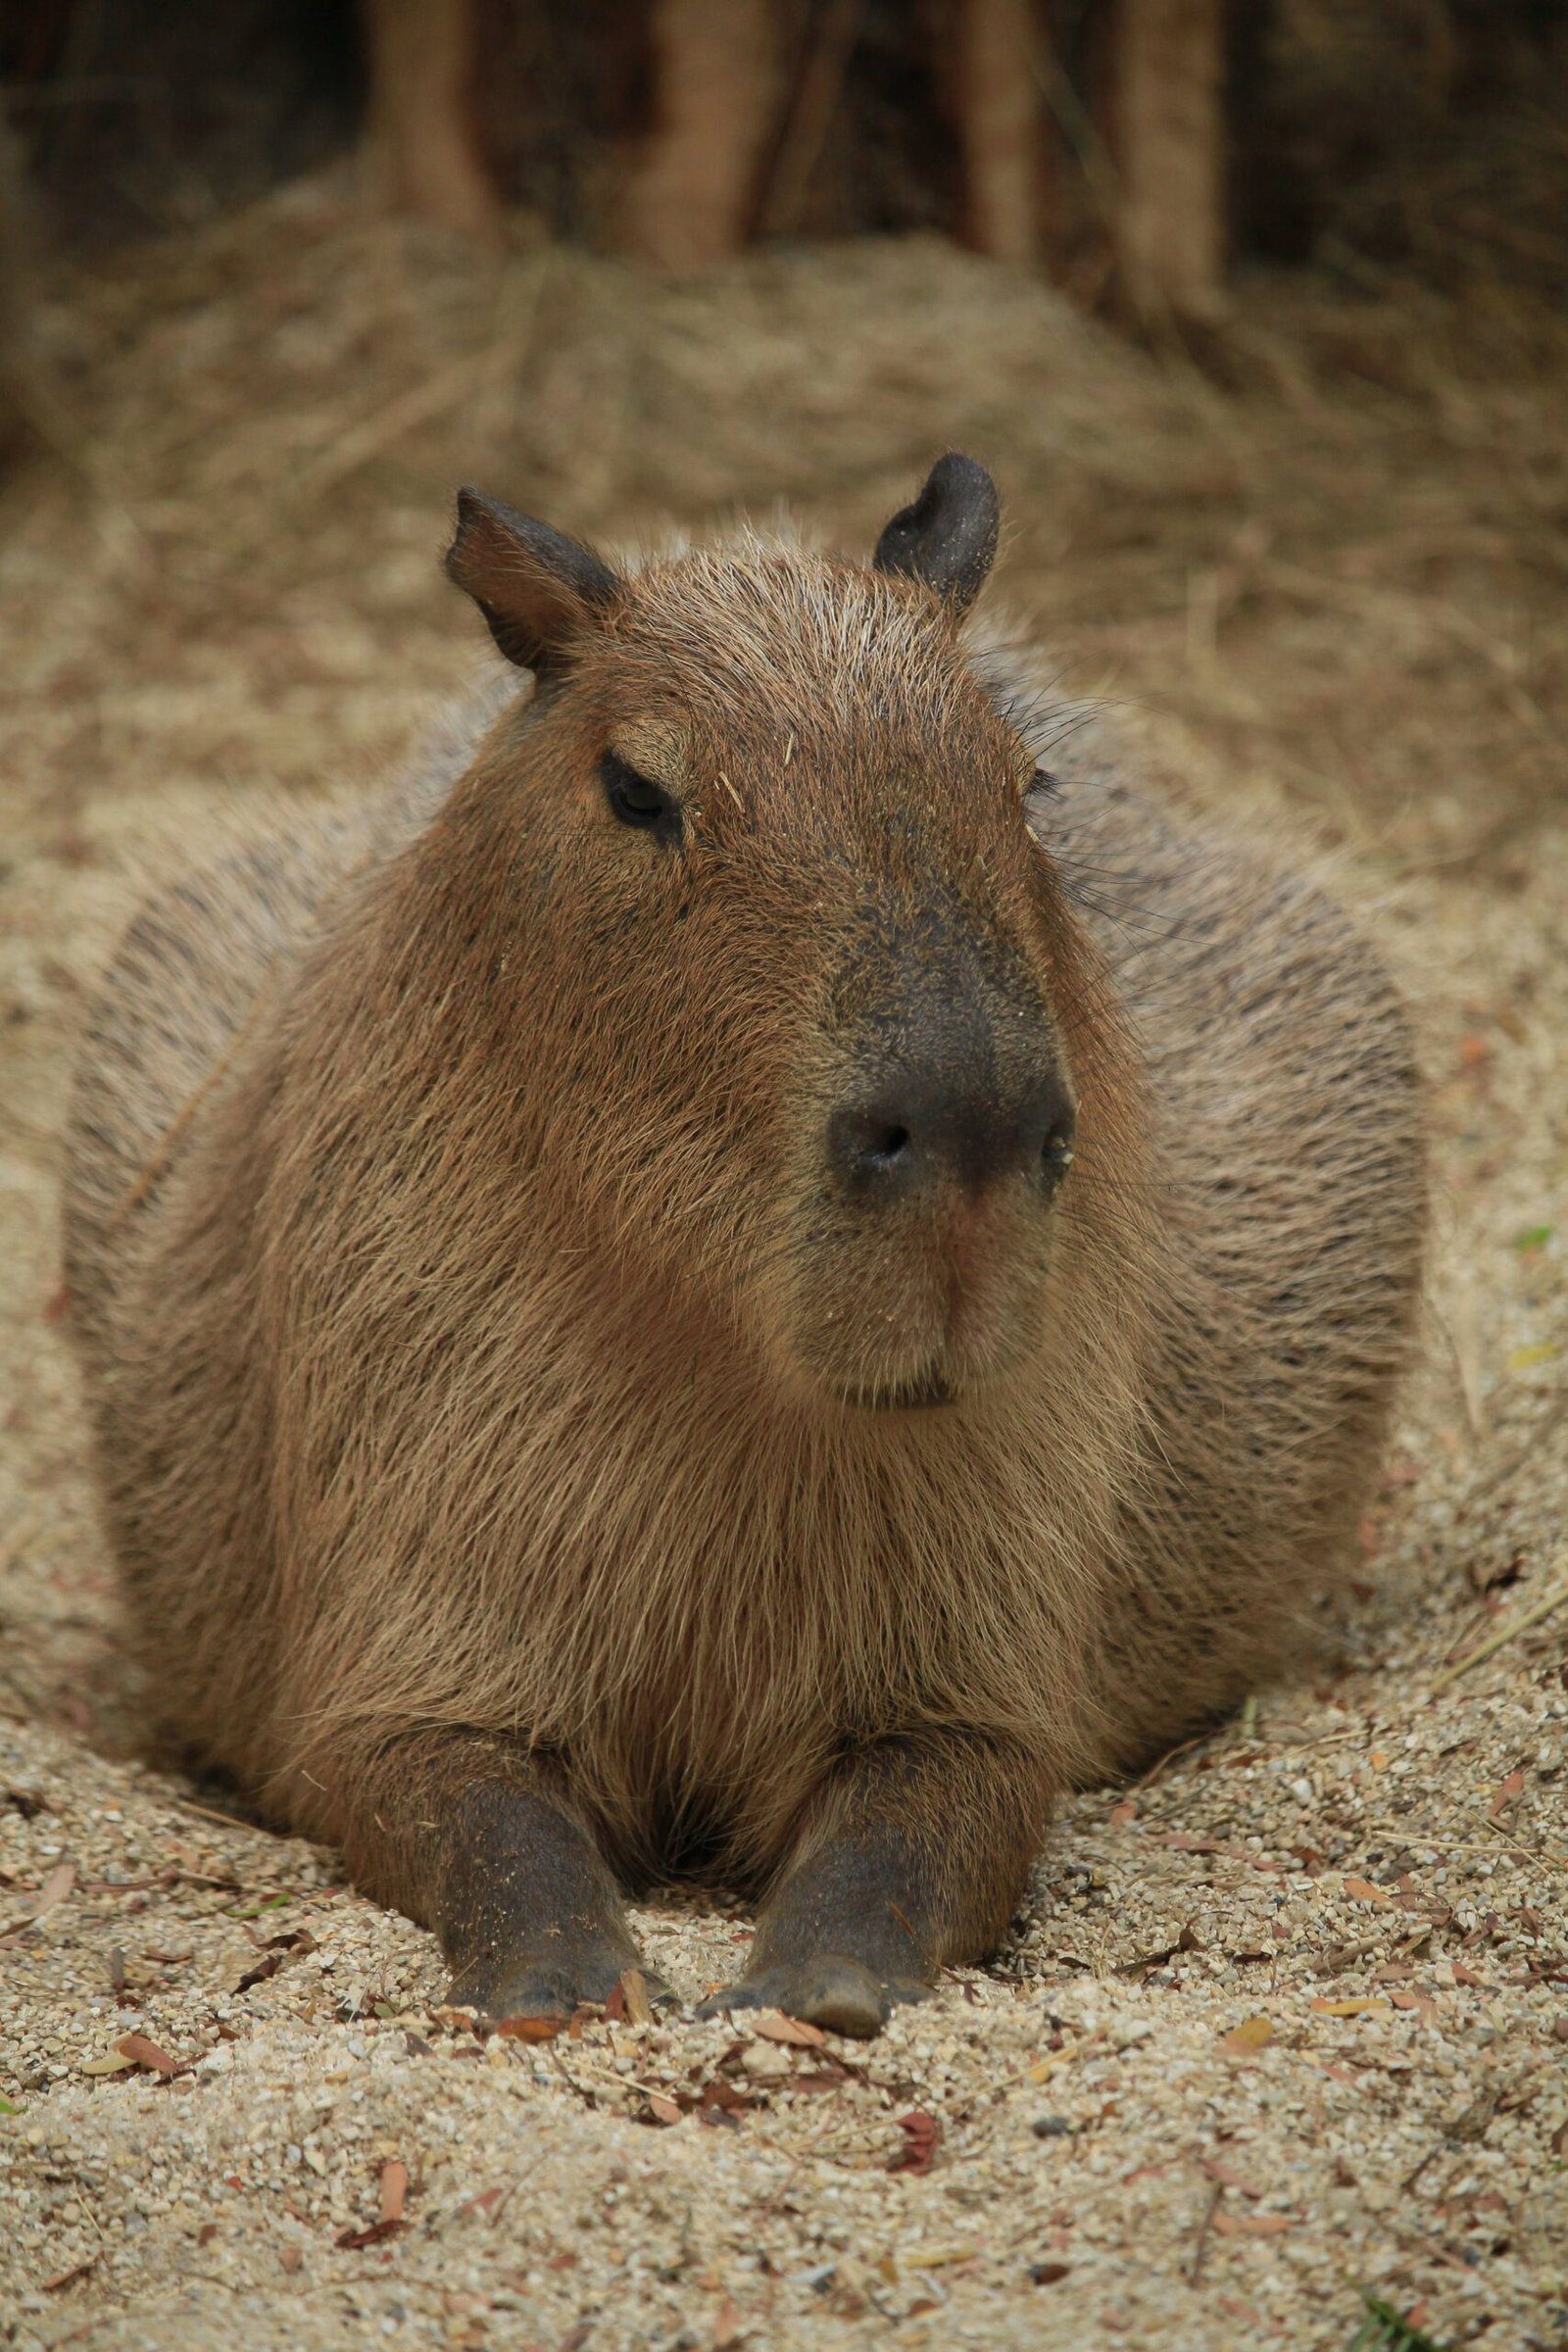 A Guide on How to Meet a Capybara